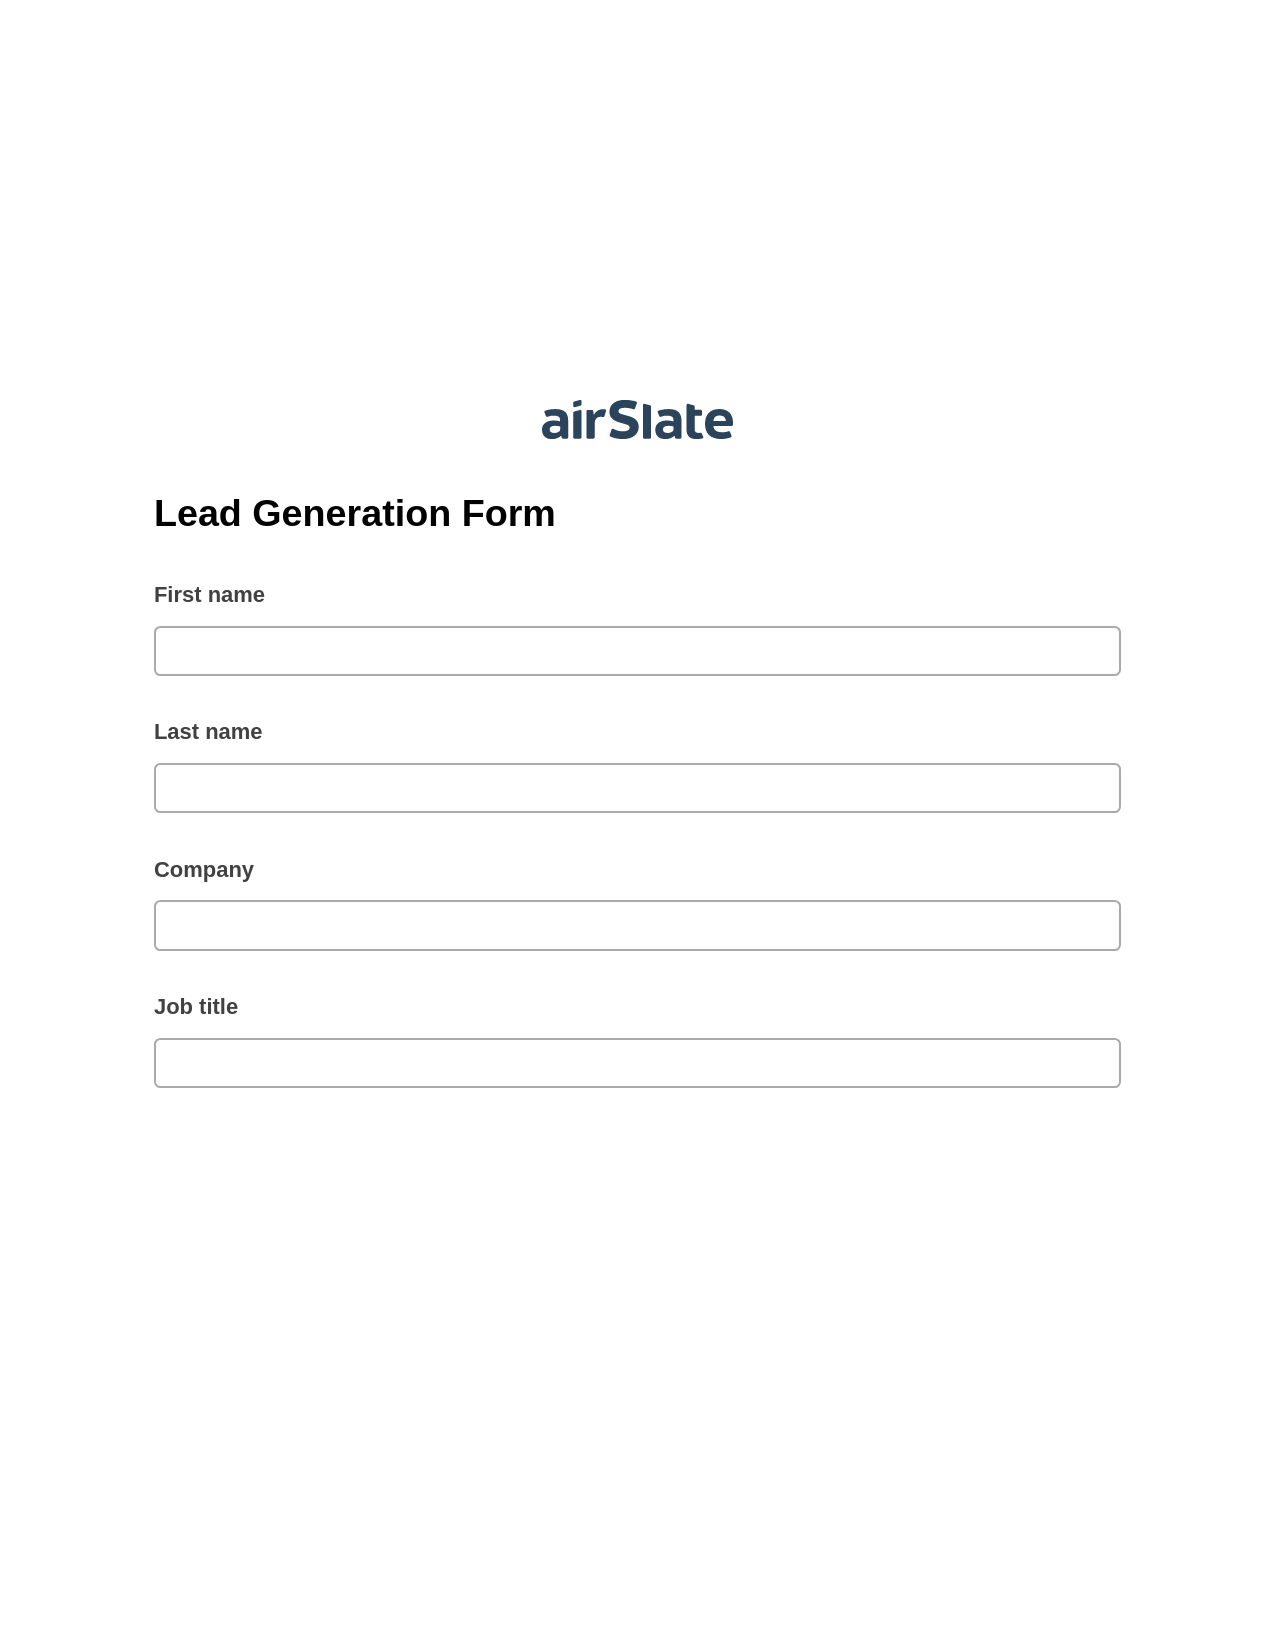 Lead Generation Form Pre-fill from CSV File Bot, Google Calendar Bot, Archive to Box Bot